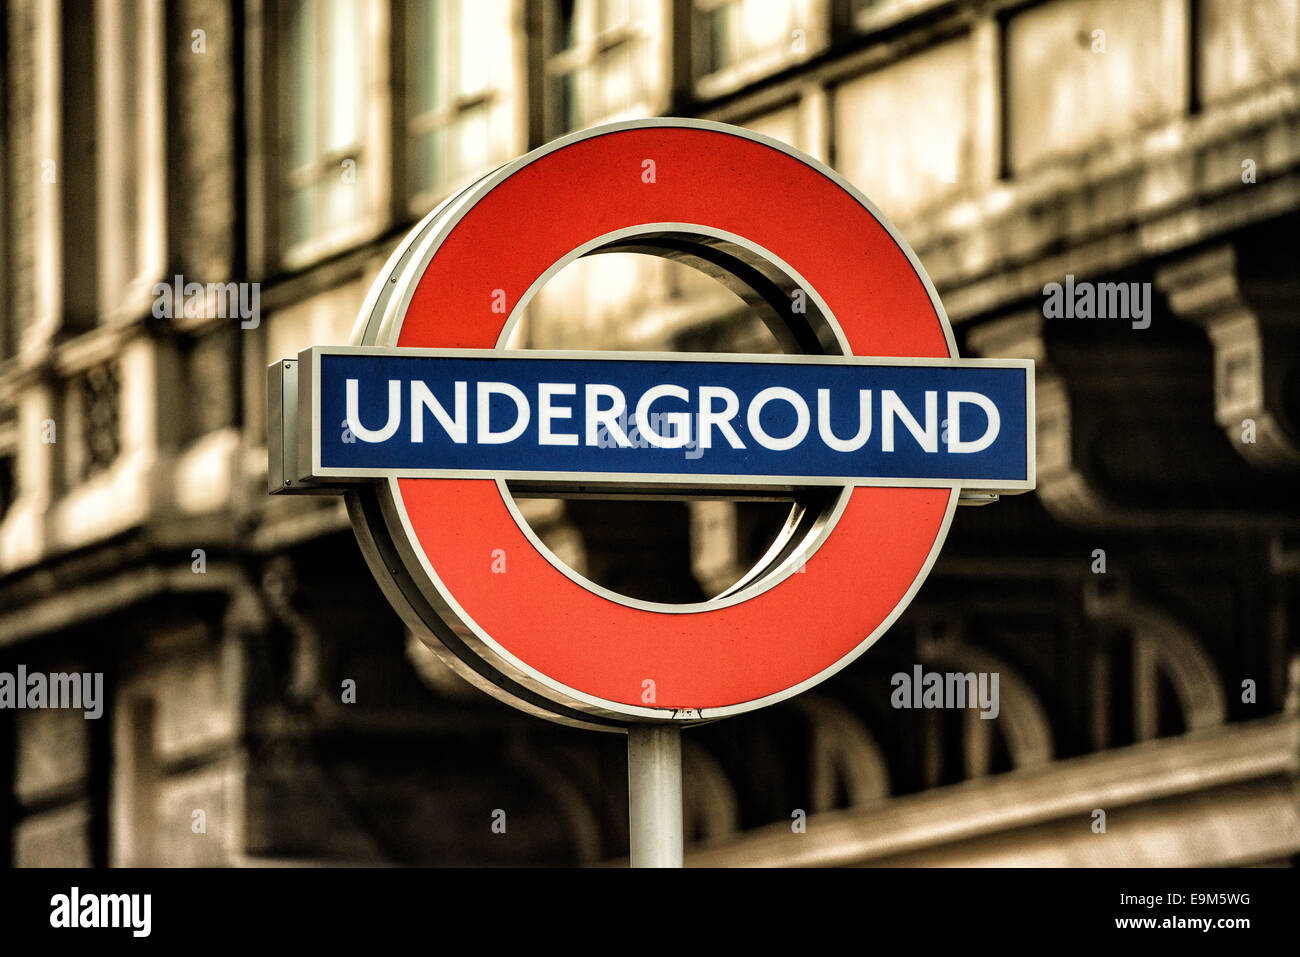 LONDON, UK - The famous London Underground logo above a station in central London, United Kingdom. Stock Photo